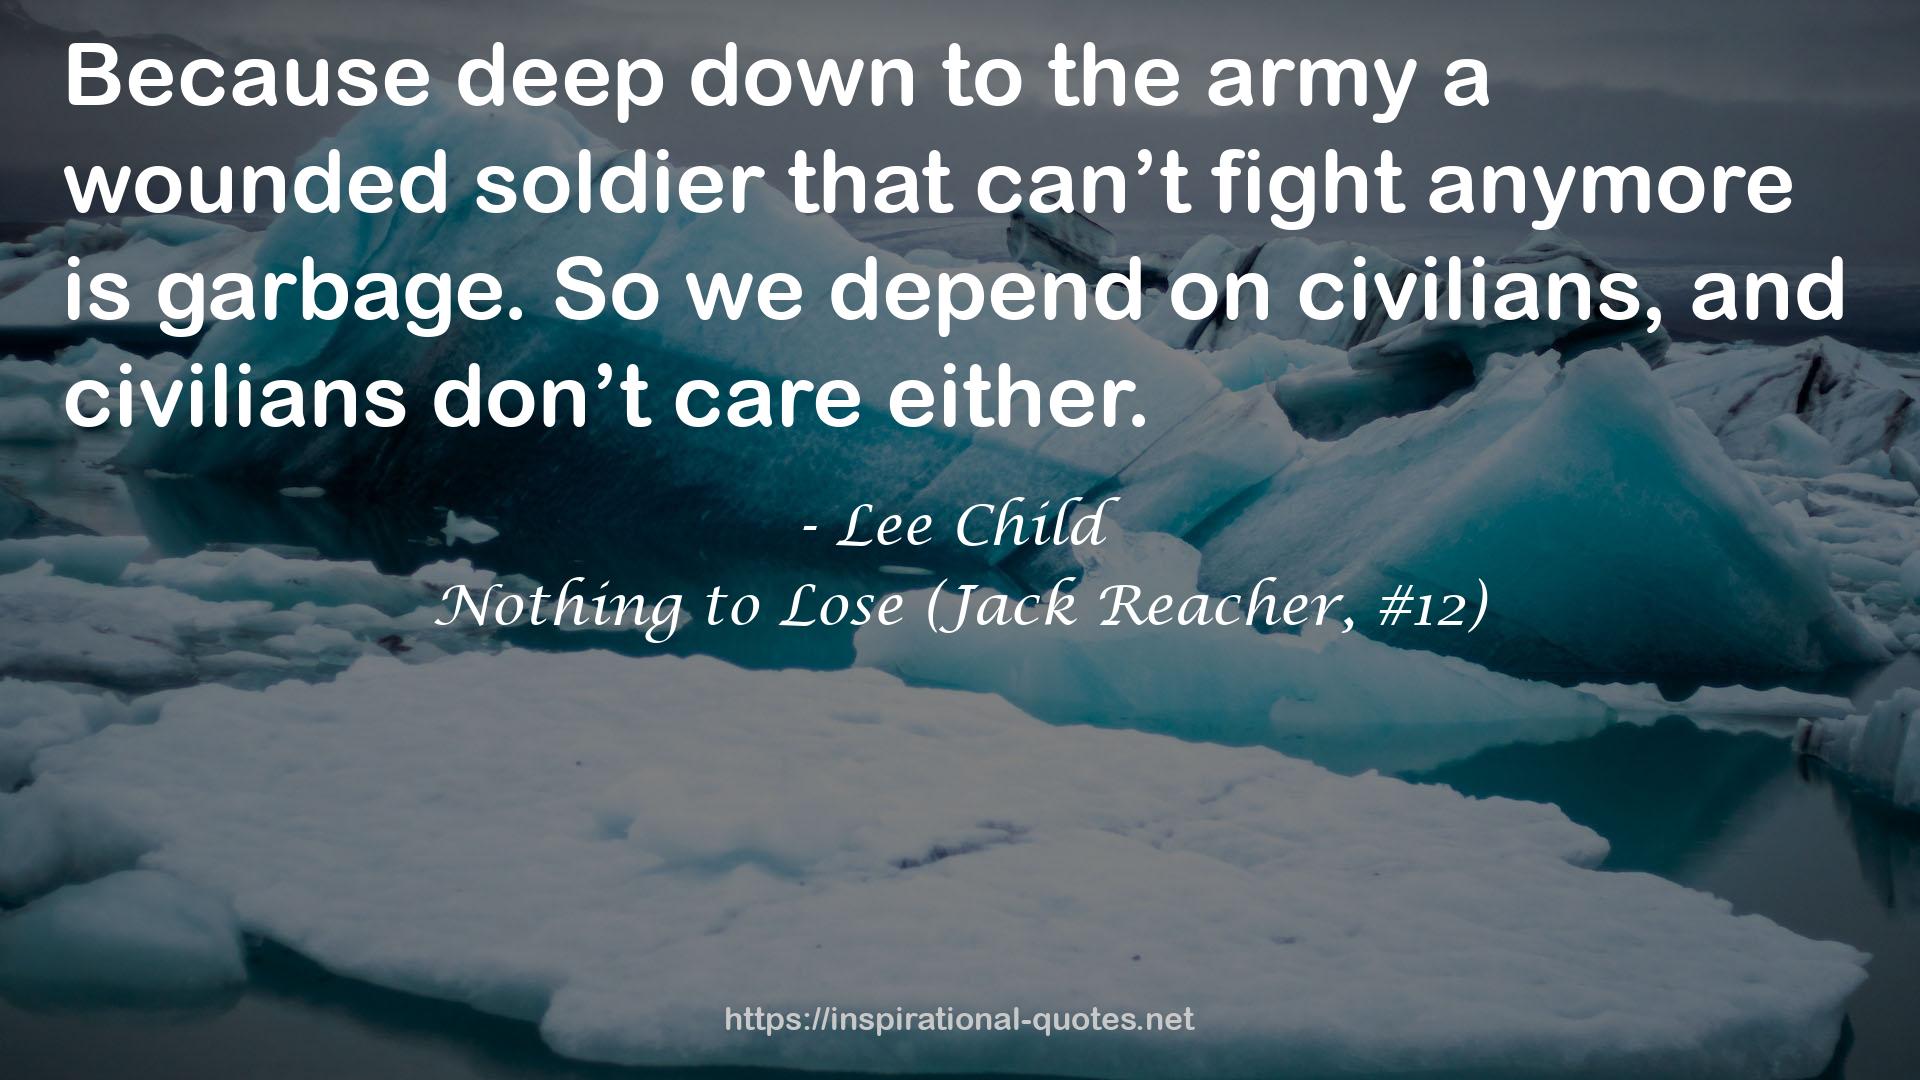 Nothing to Lose (Jack Reacher, #12) QUOTES